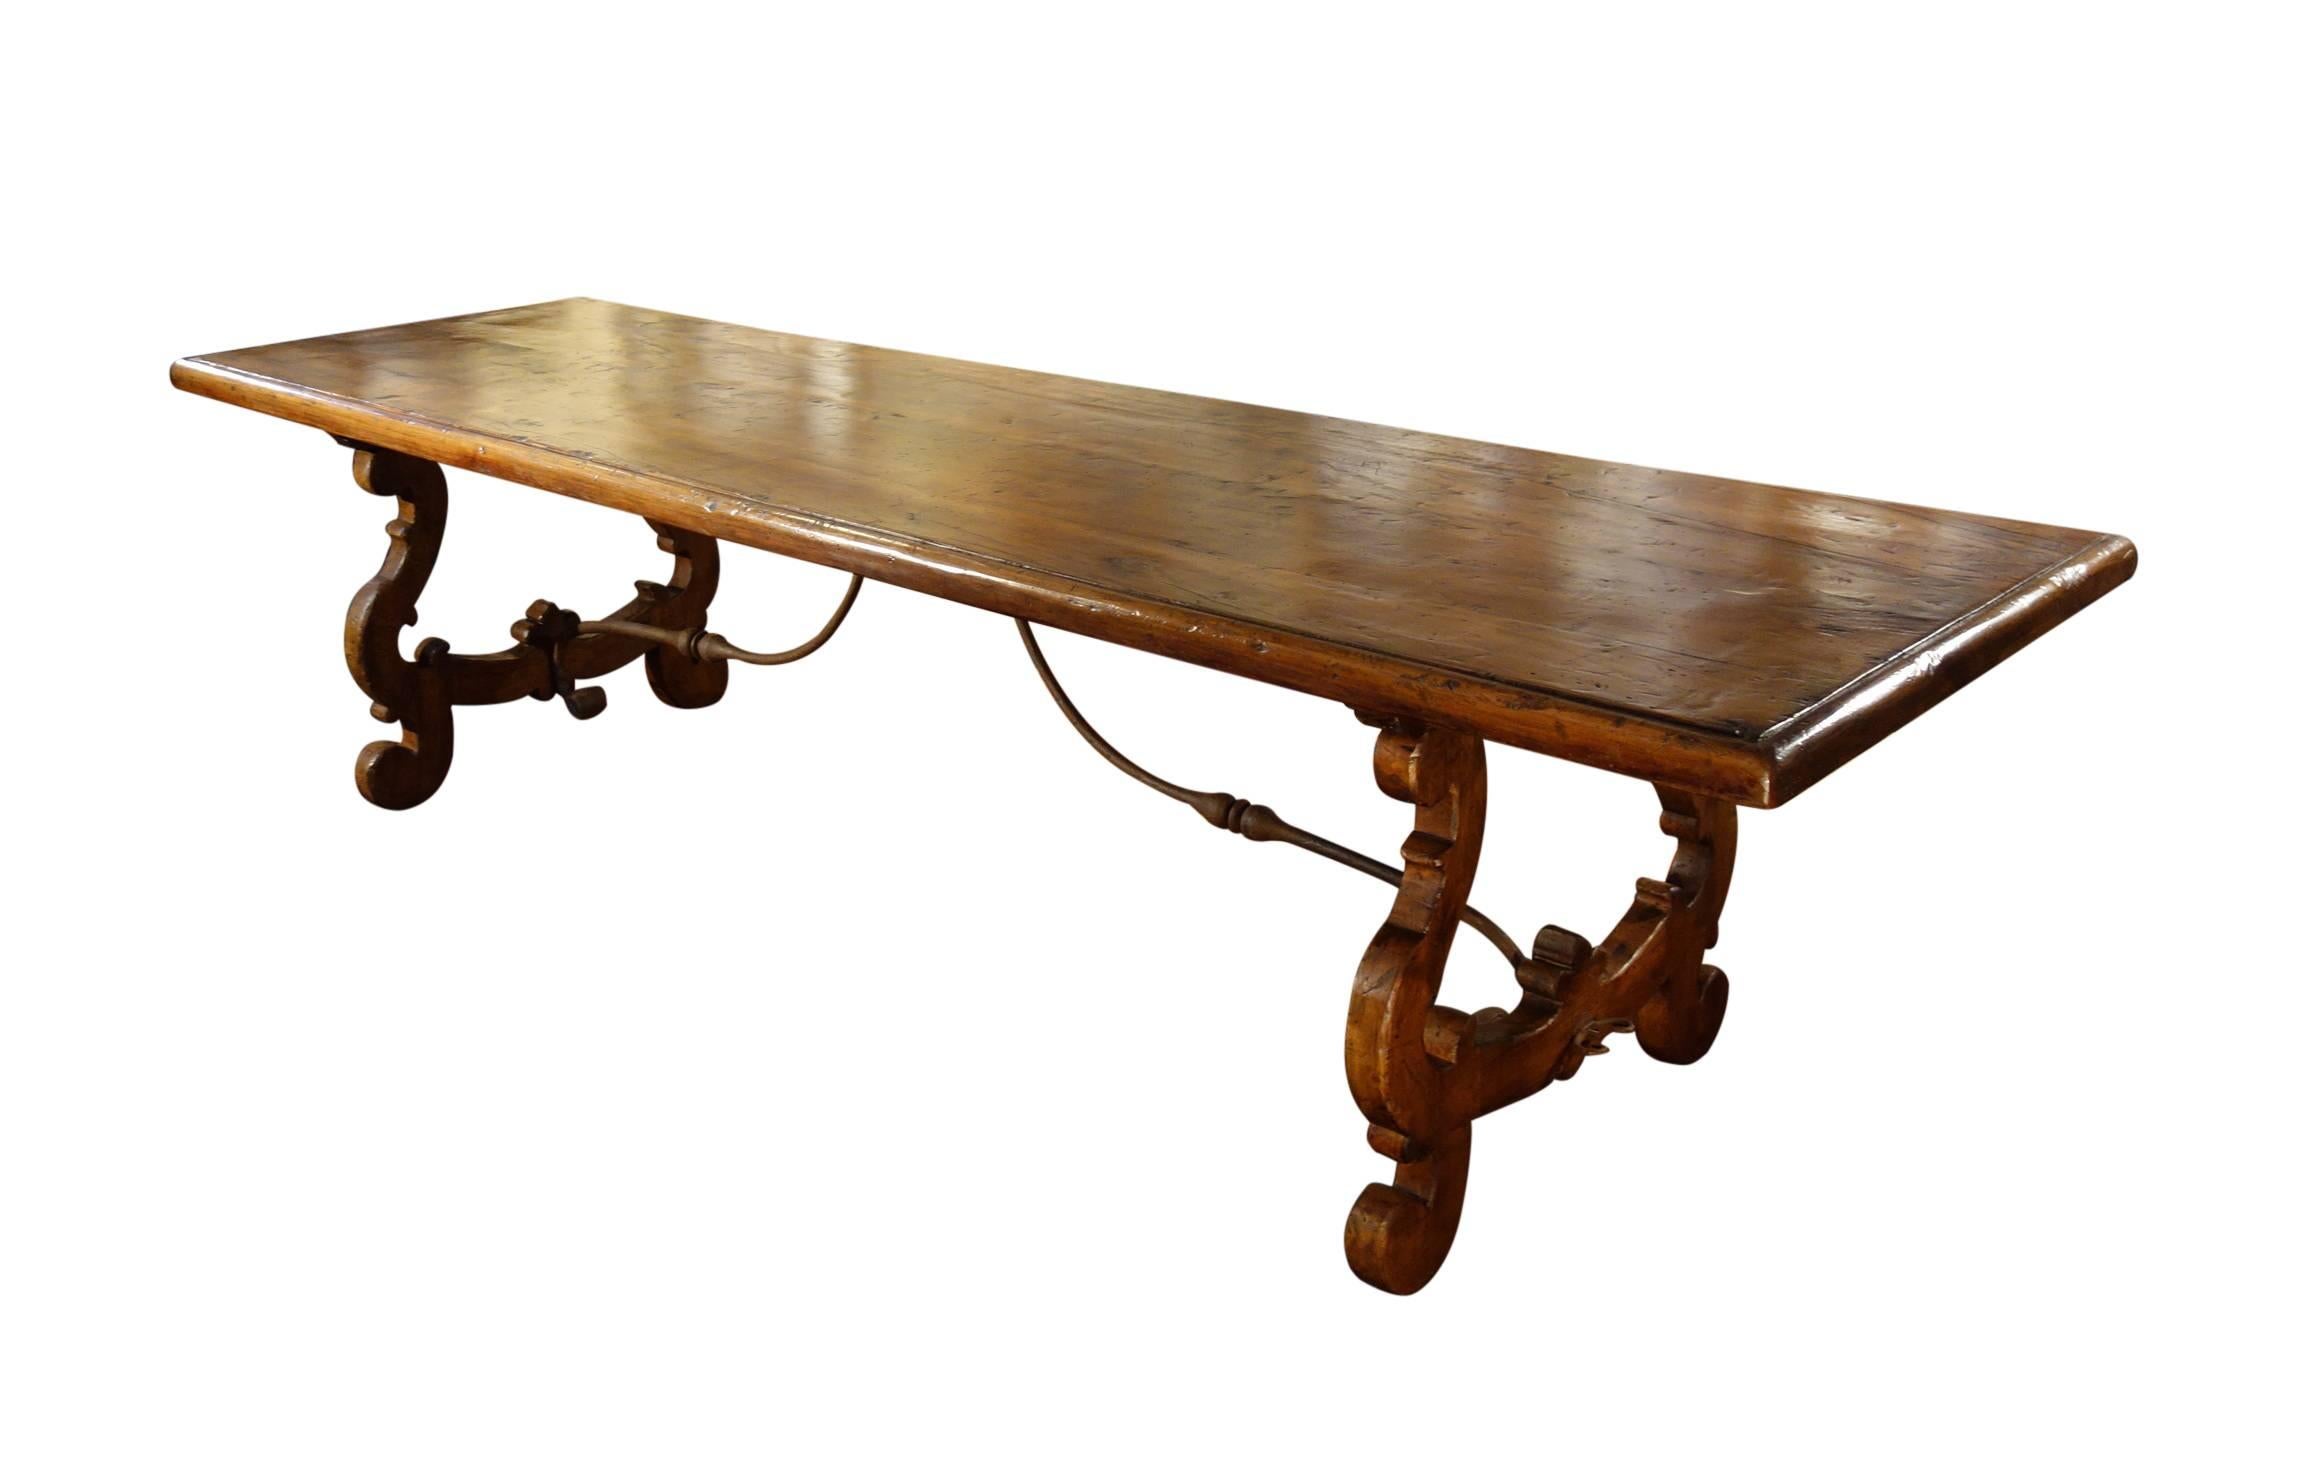 Renaissance Revival 17th Century Italian Refectory Style Old Walnut Table with Forged Iron 